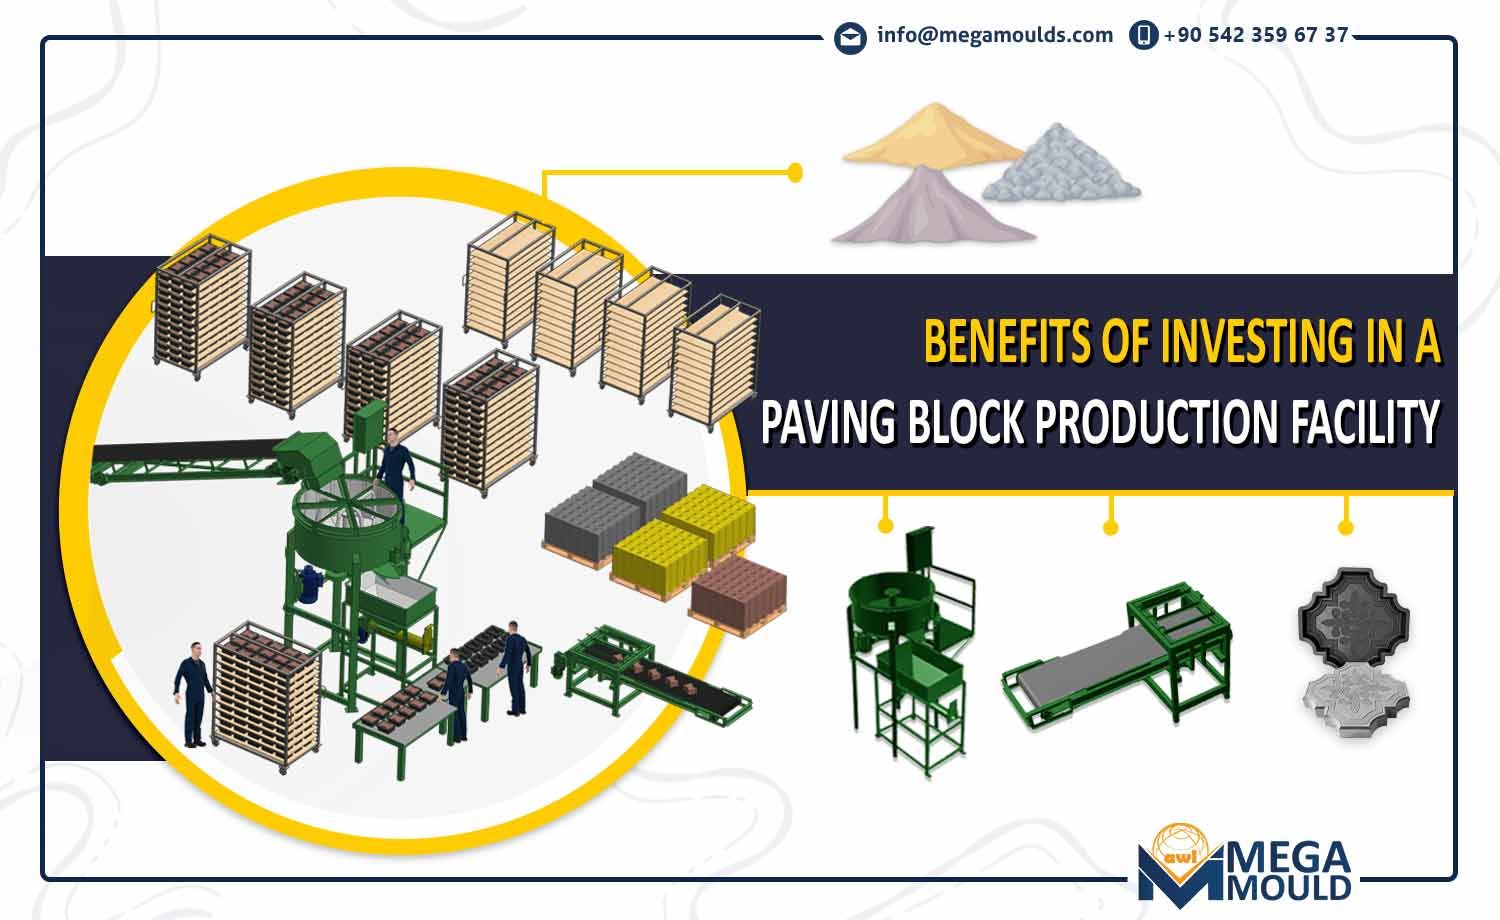 Benefits of Investing In a Paving Block Production Facility